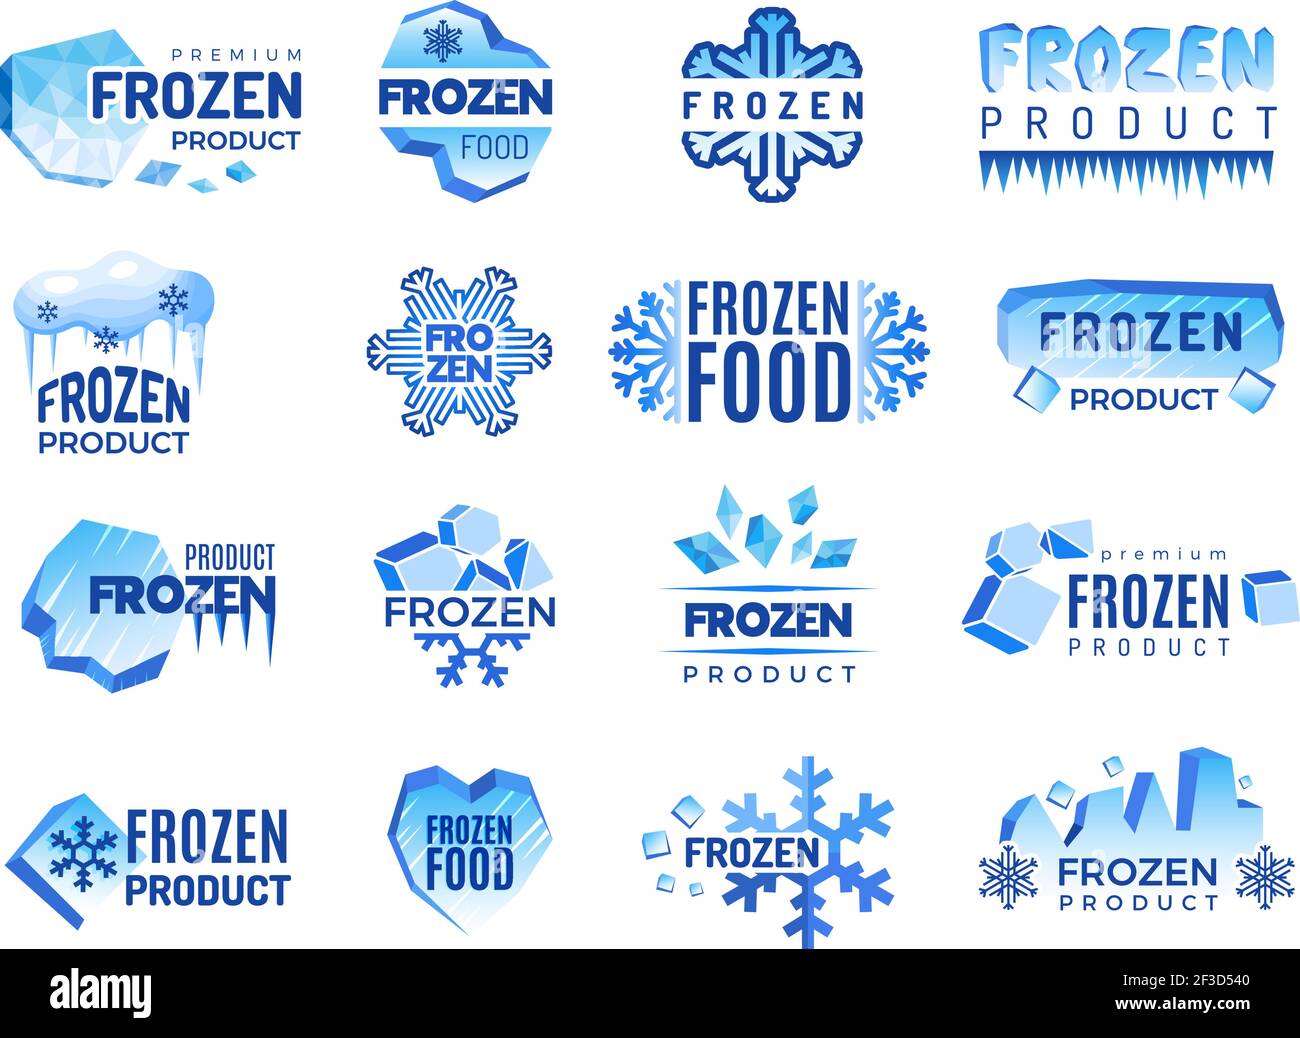 Ice product logo. Frozen food business identity blue vector cold graphic elements Stock Vector